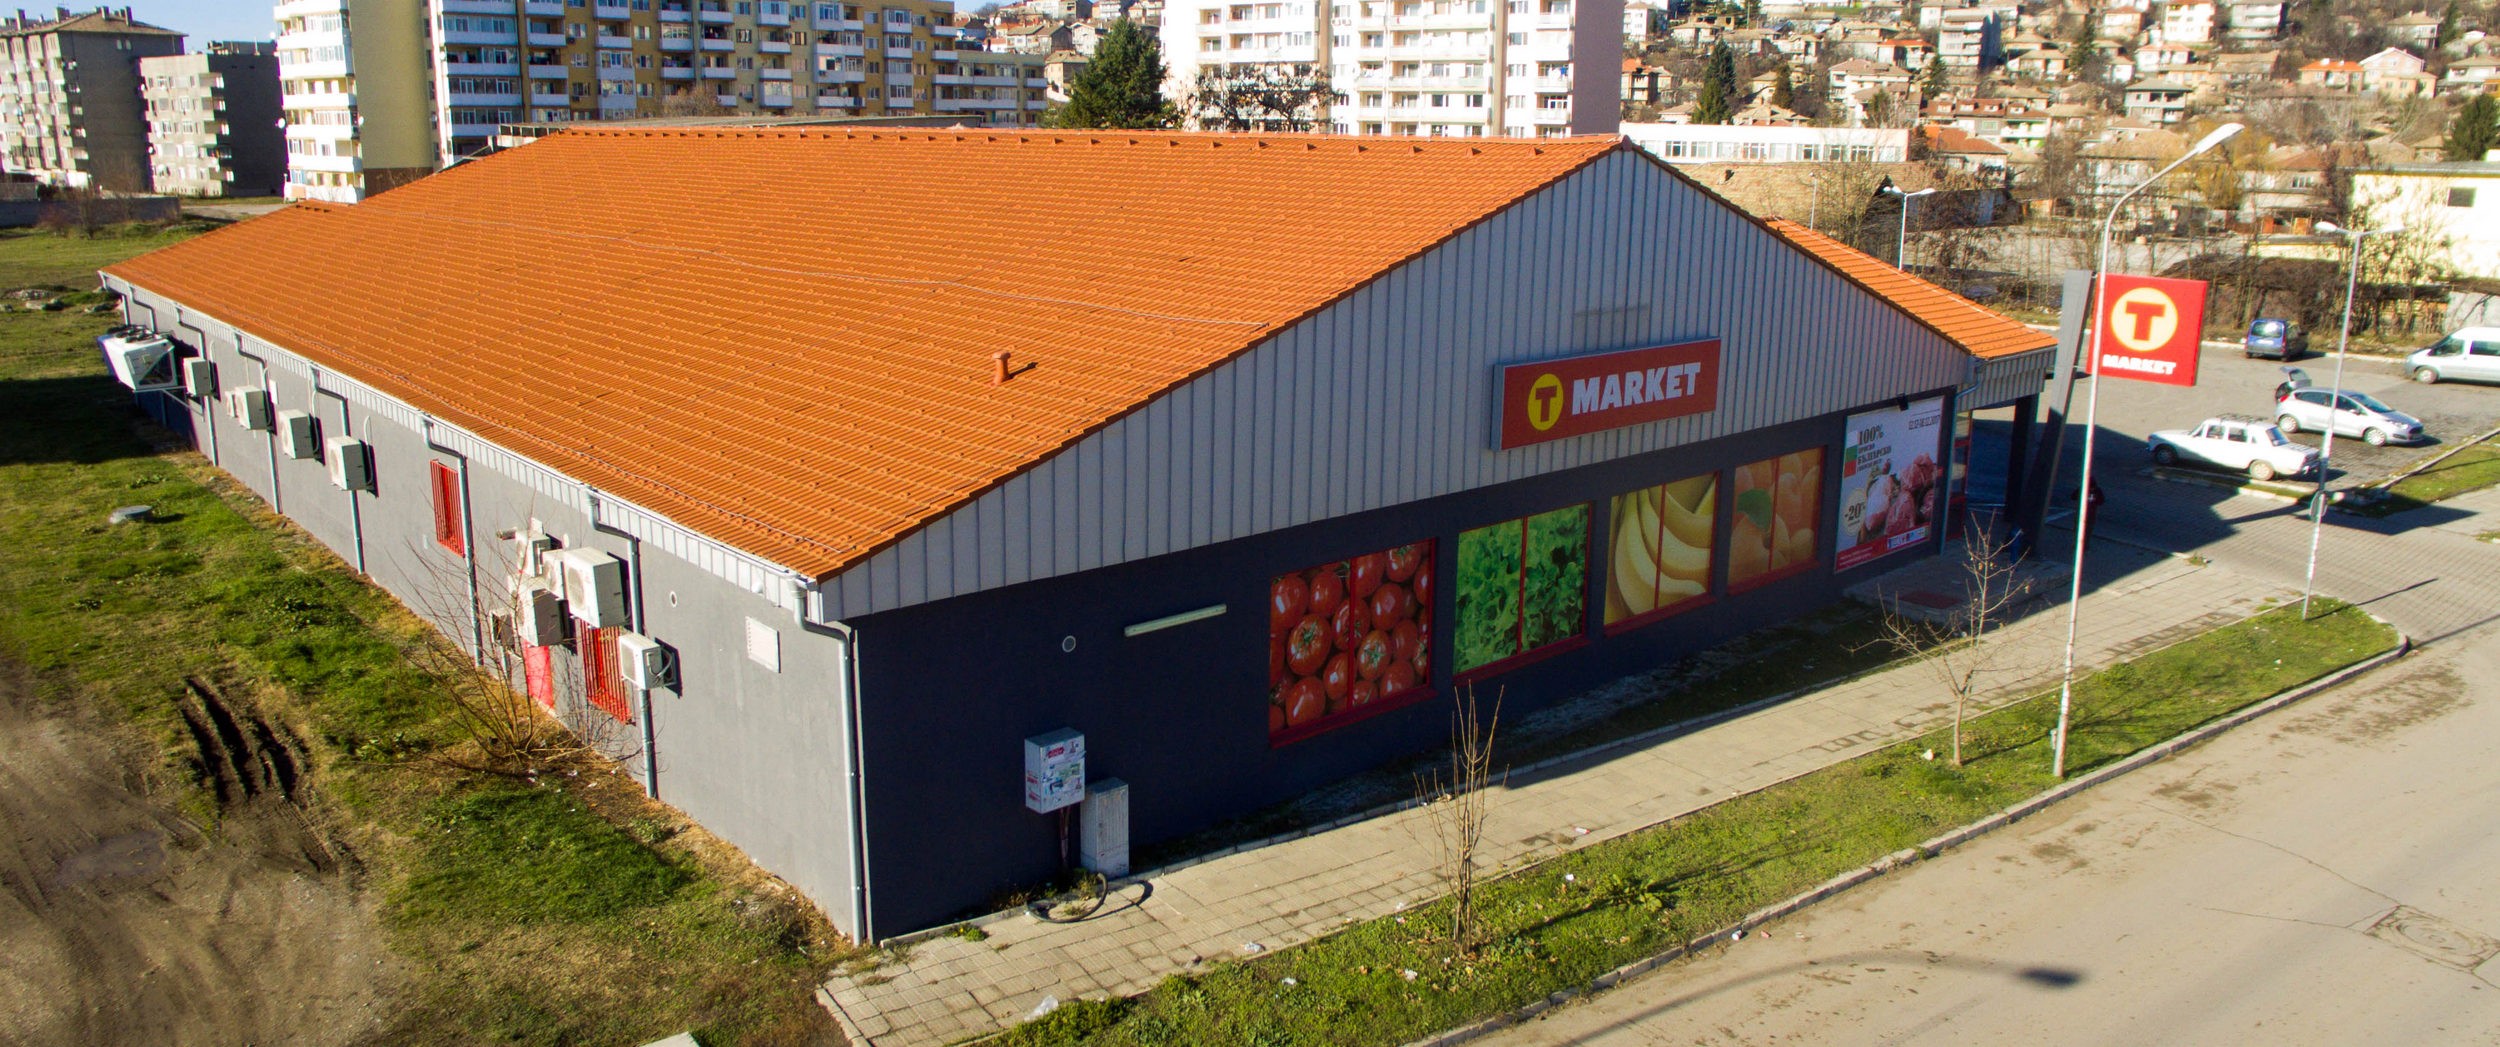 Reconstruction of Store of T Market - Popovo